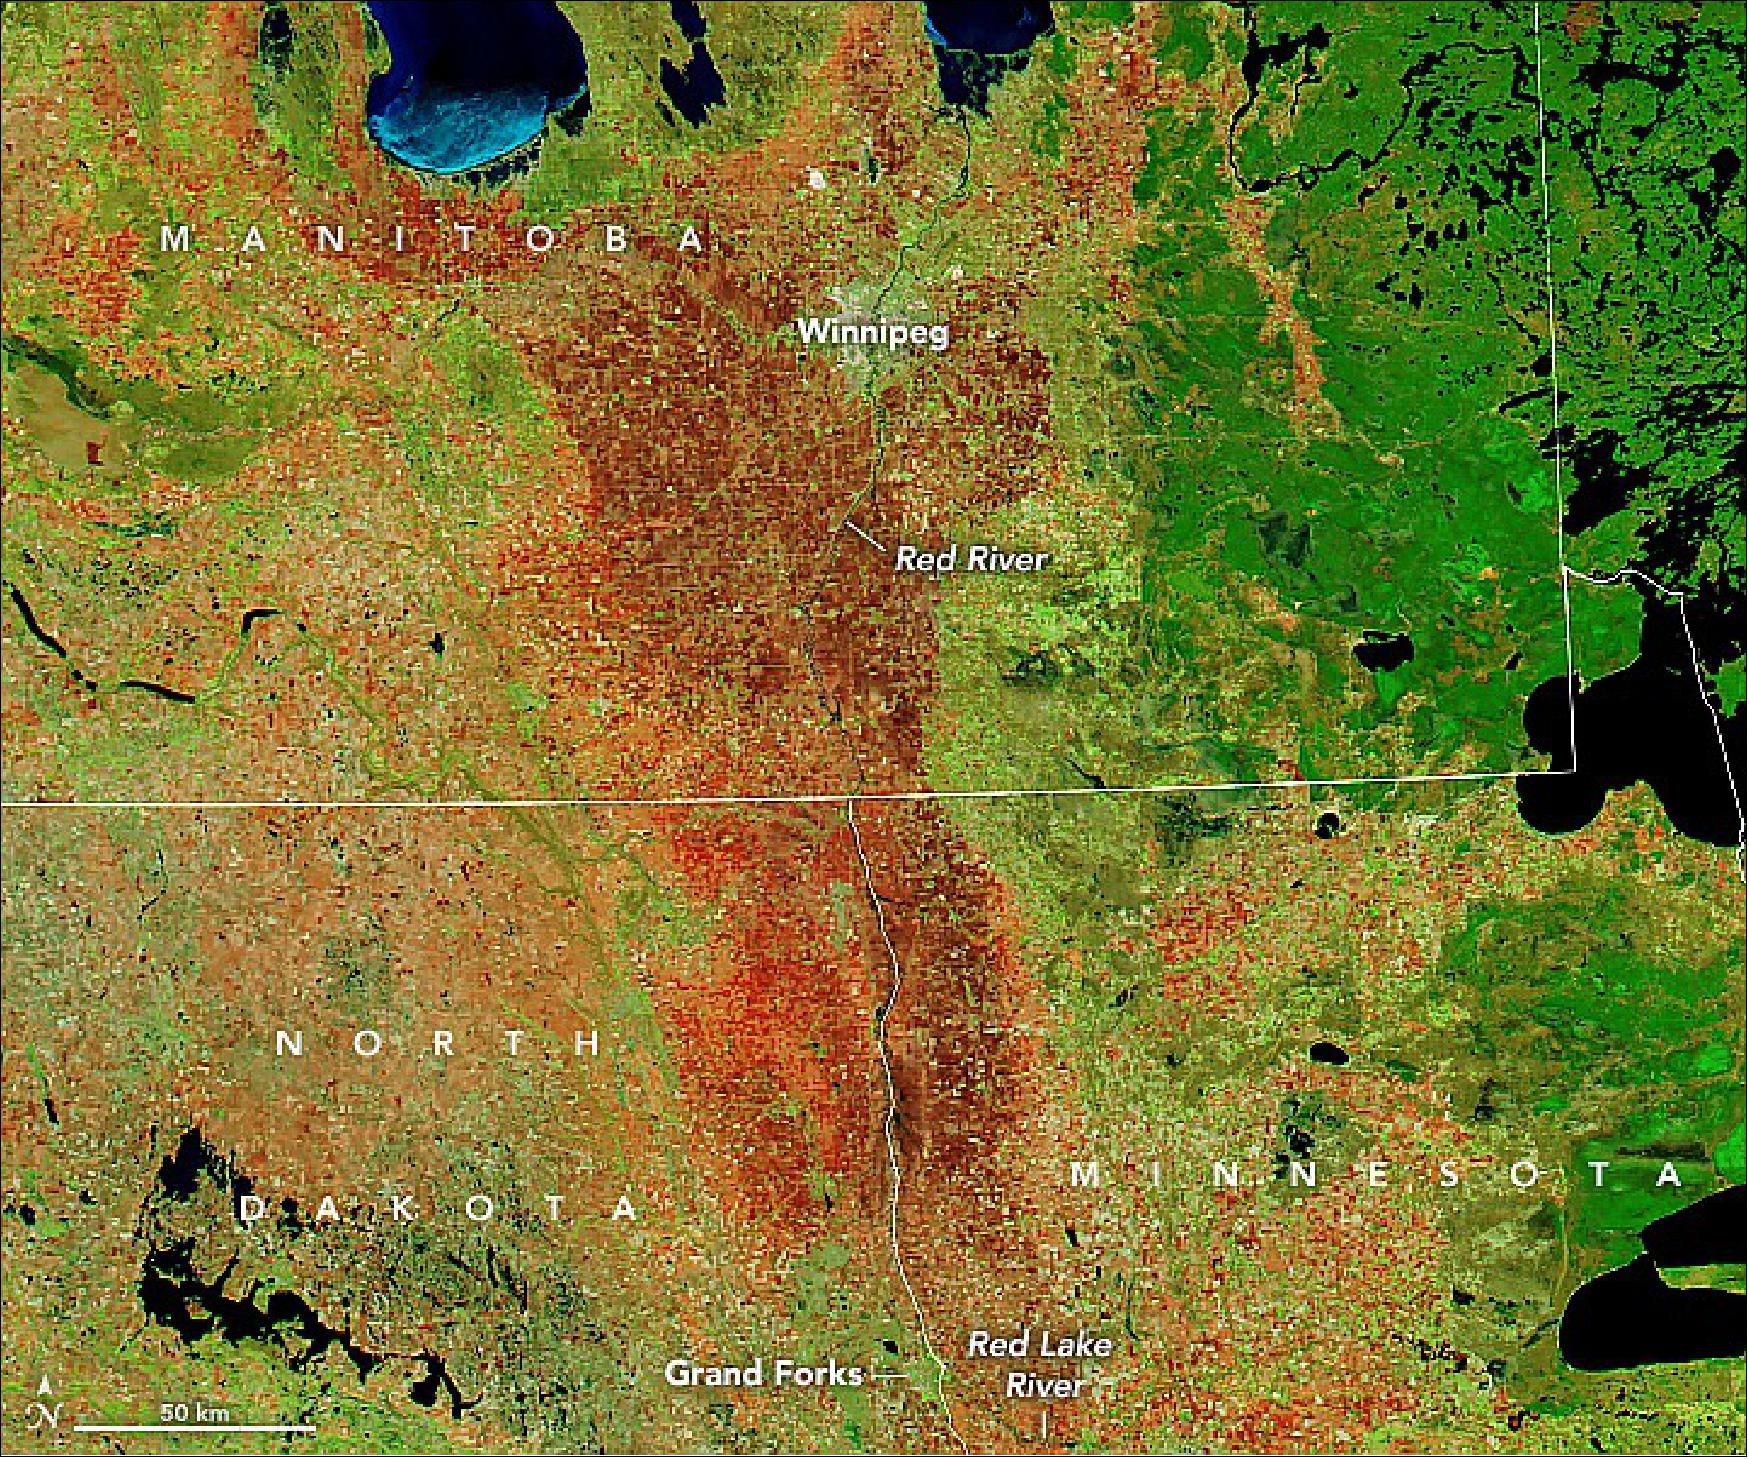 Figure 20: This Aqua image was acquired on 11 May 2020 under more typical spring conditions (image credit: NASA Earth Observatory)